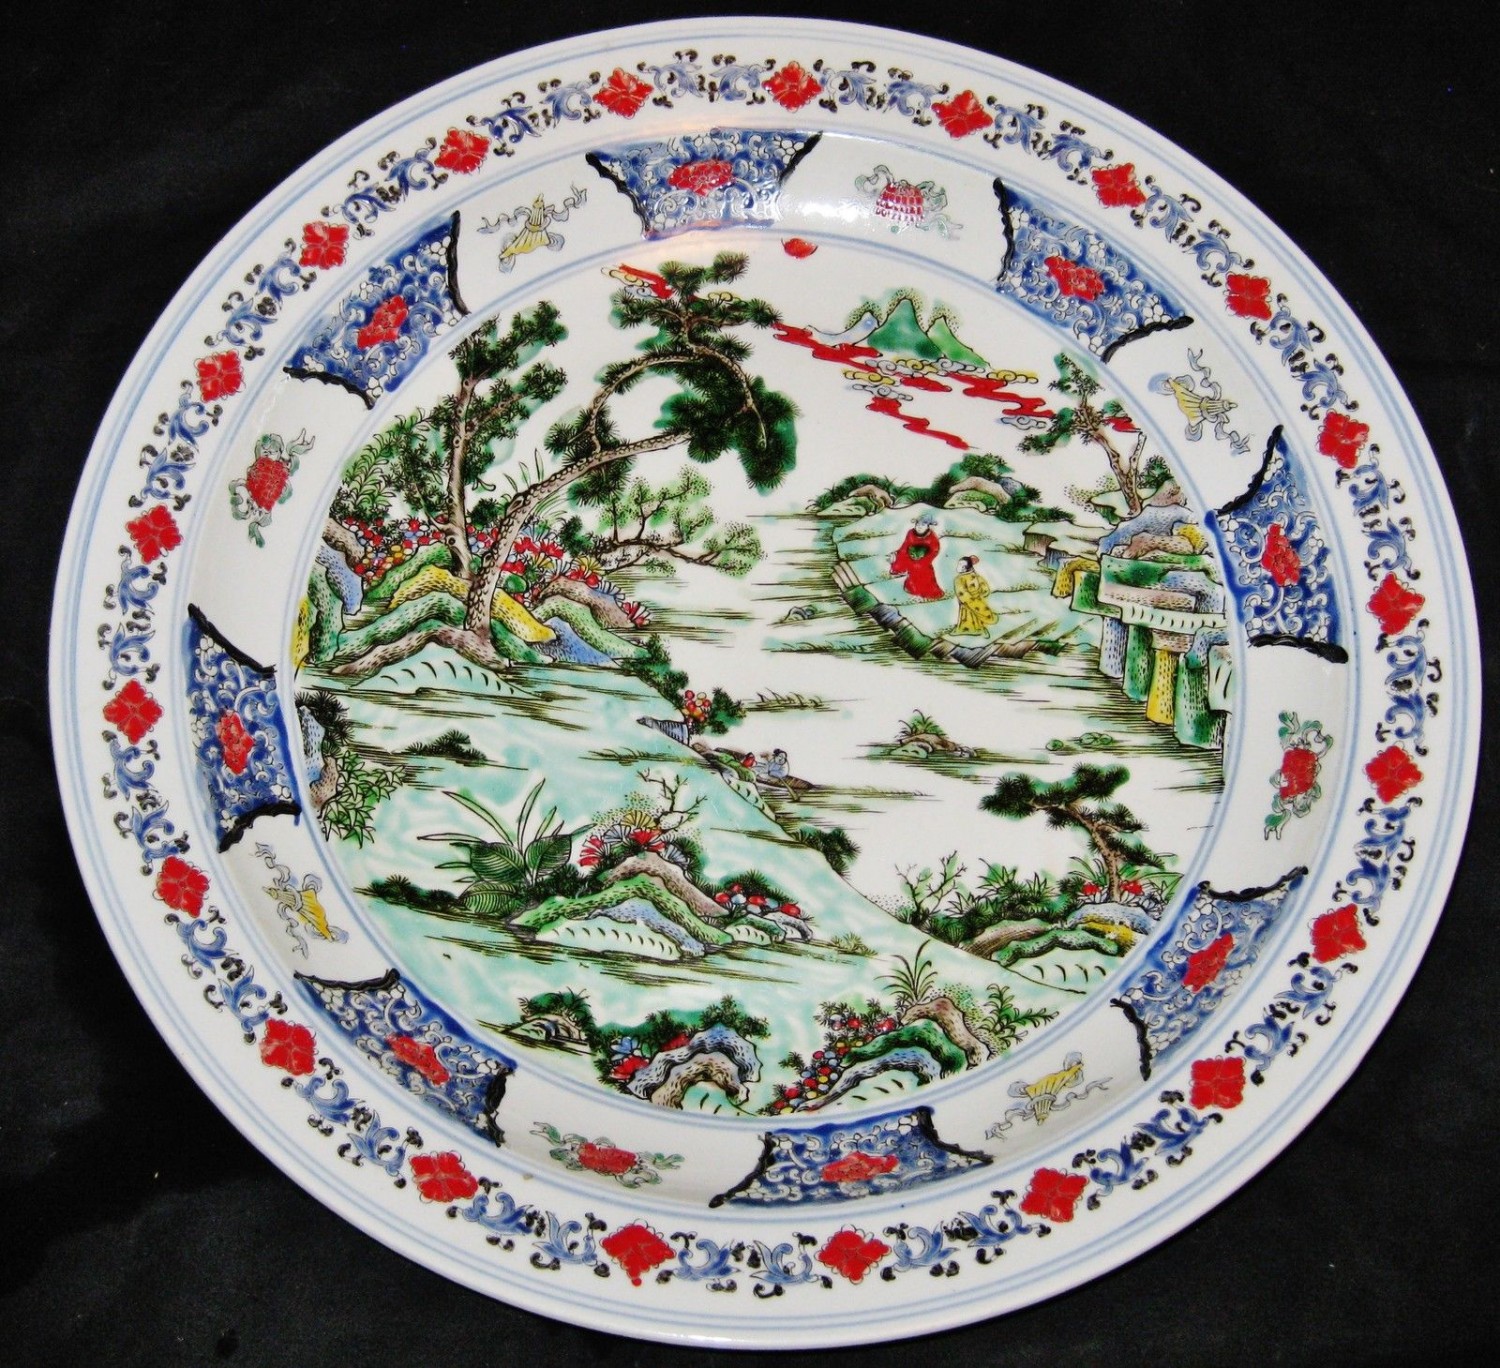 ANTIQUE BIG CHINESE PORCELAIN CHARGER 45 cm, HAND PAINTED KANG -XI MARK, NR